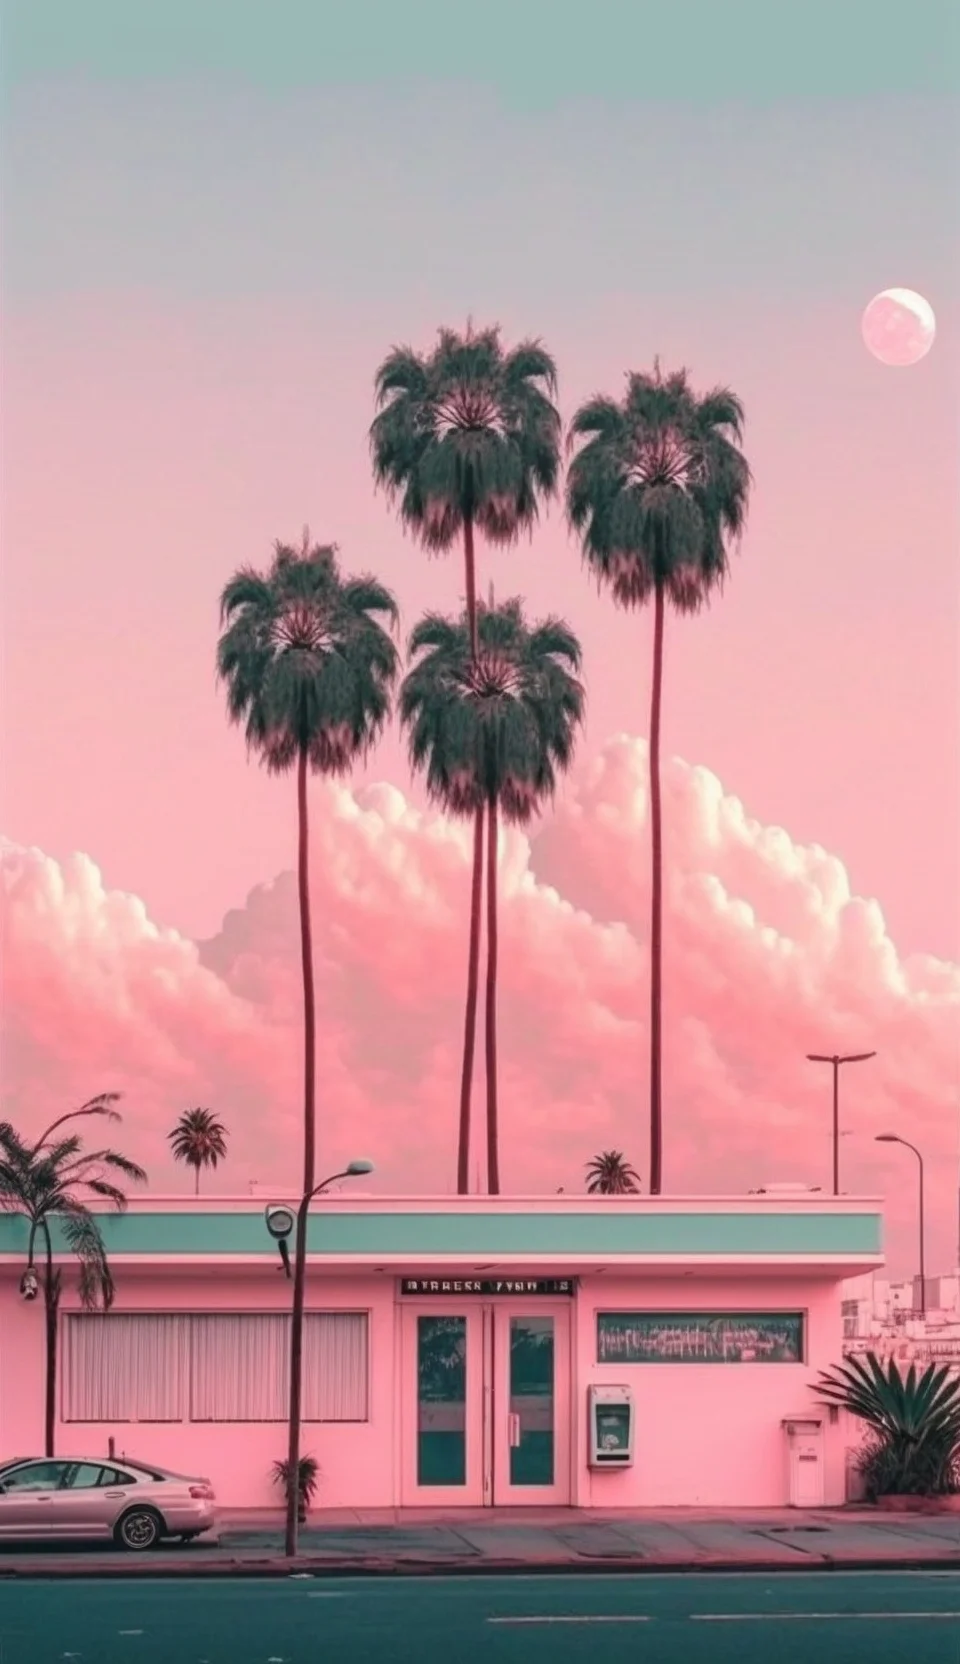 A pink building with palm trees in front of it - California